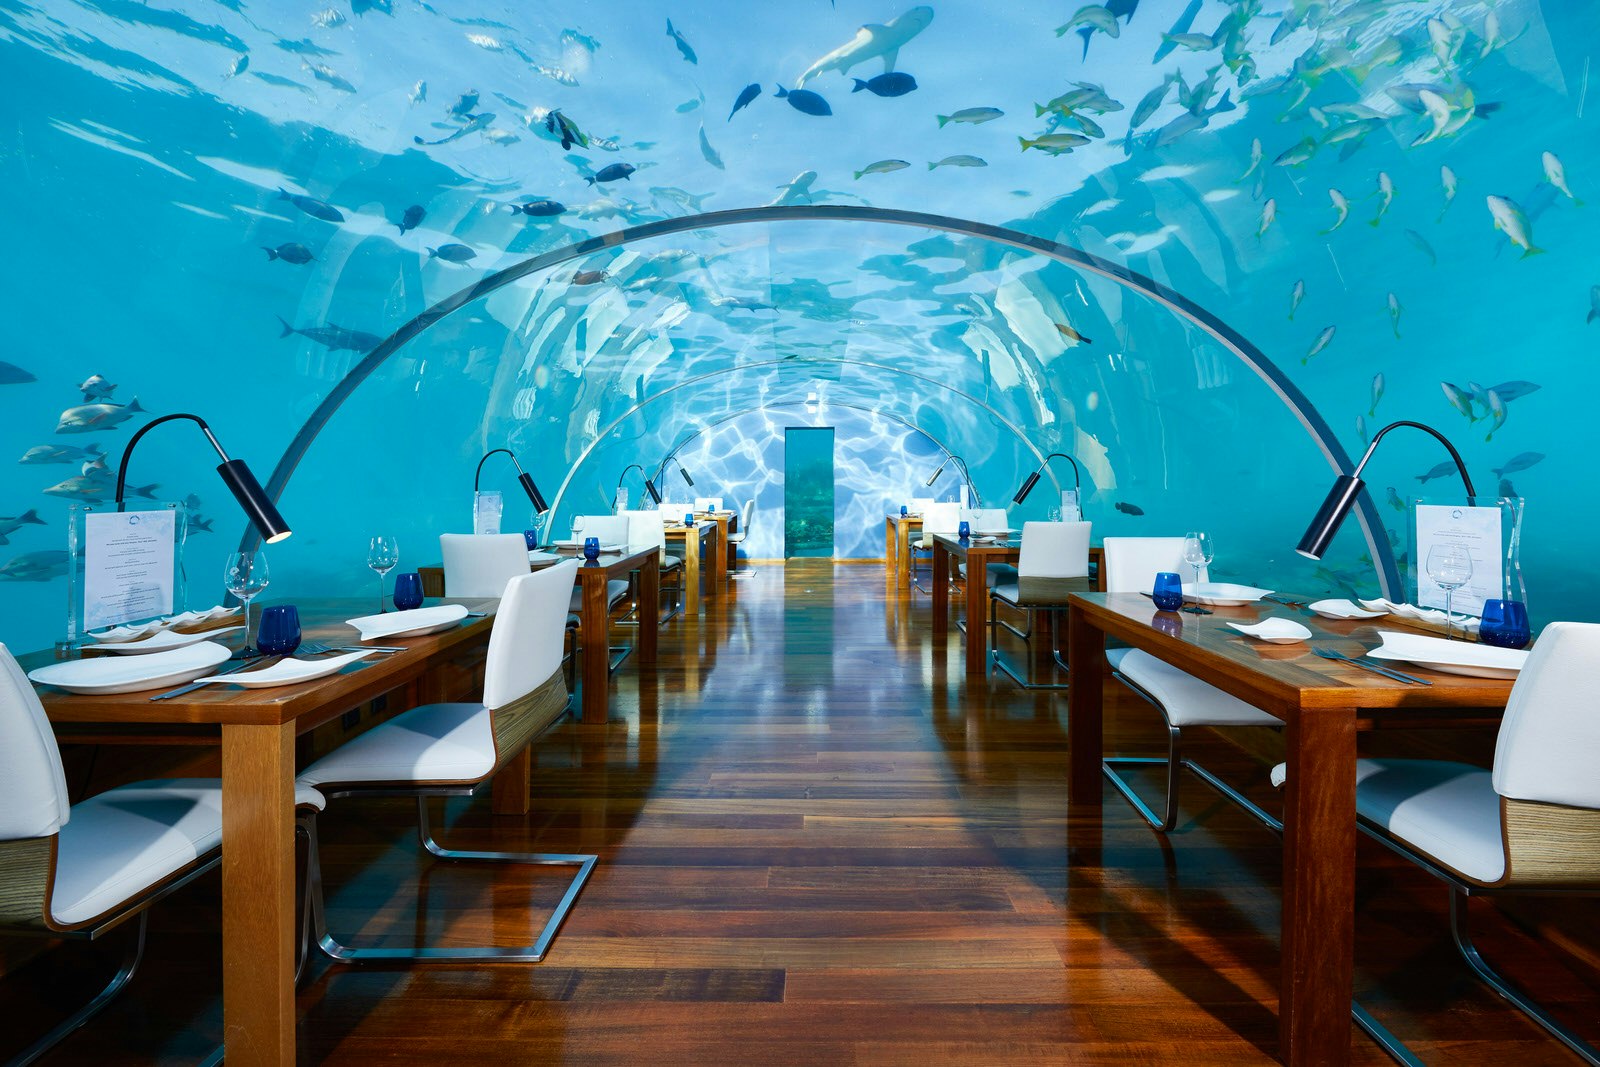 A shot of the interior of Ithaa restaurant in the Maldives. The dining room is five metres under the clear blue sea and there is lots of marine life visible through the perspex walls. The wood panelled floor is set with chic, minimalist chairs and tables